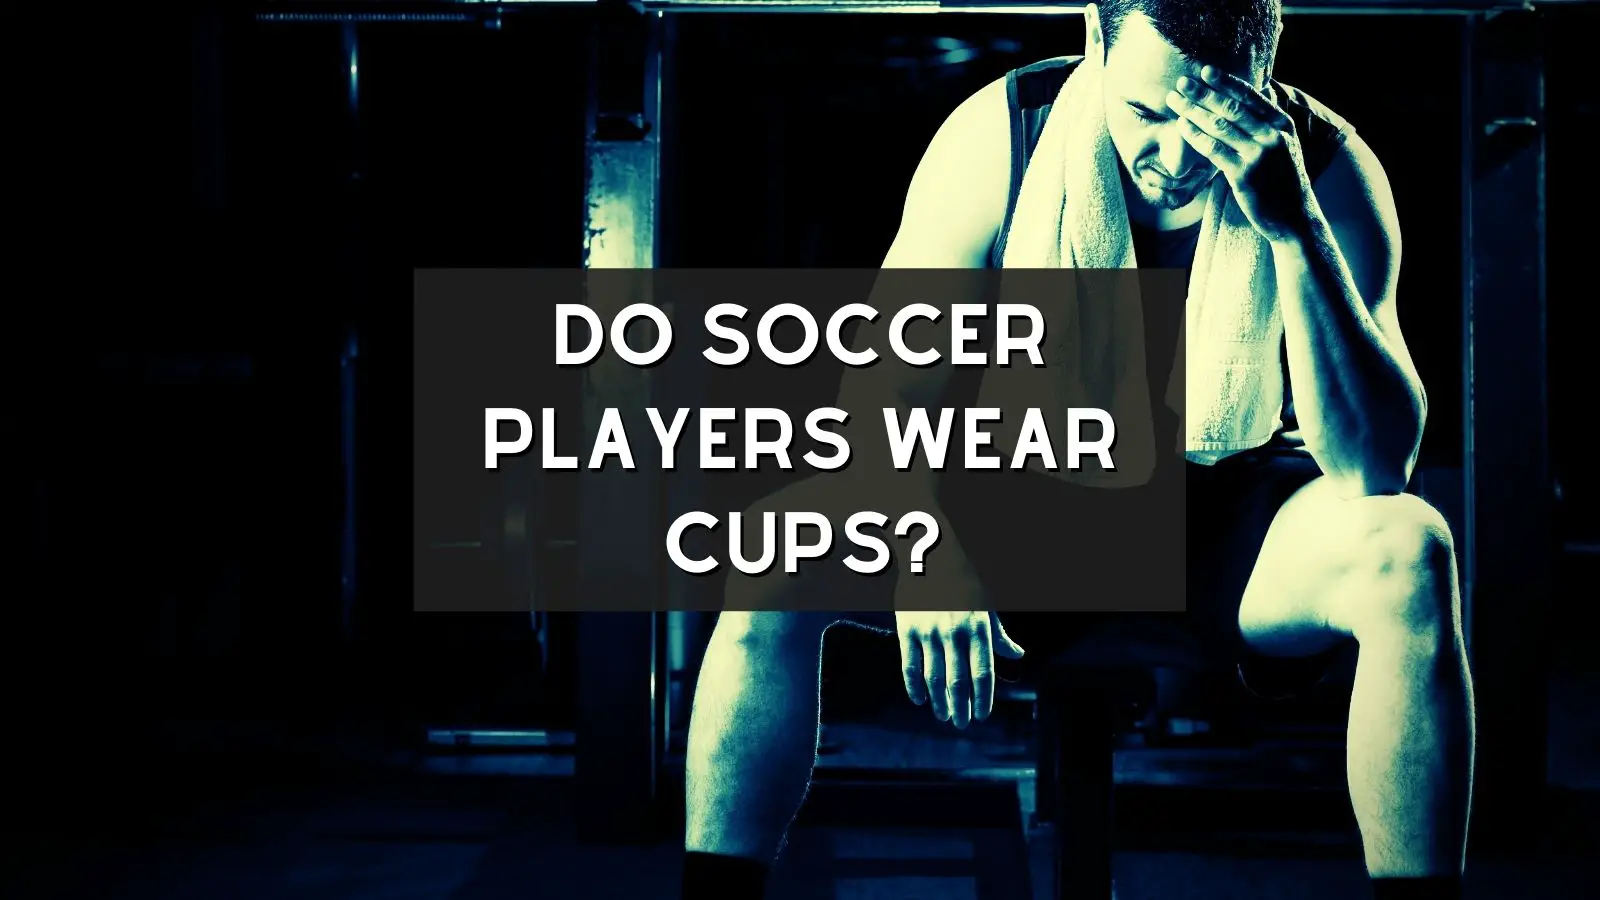 Do Soccer Players Wear Cups?